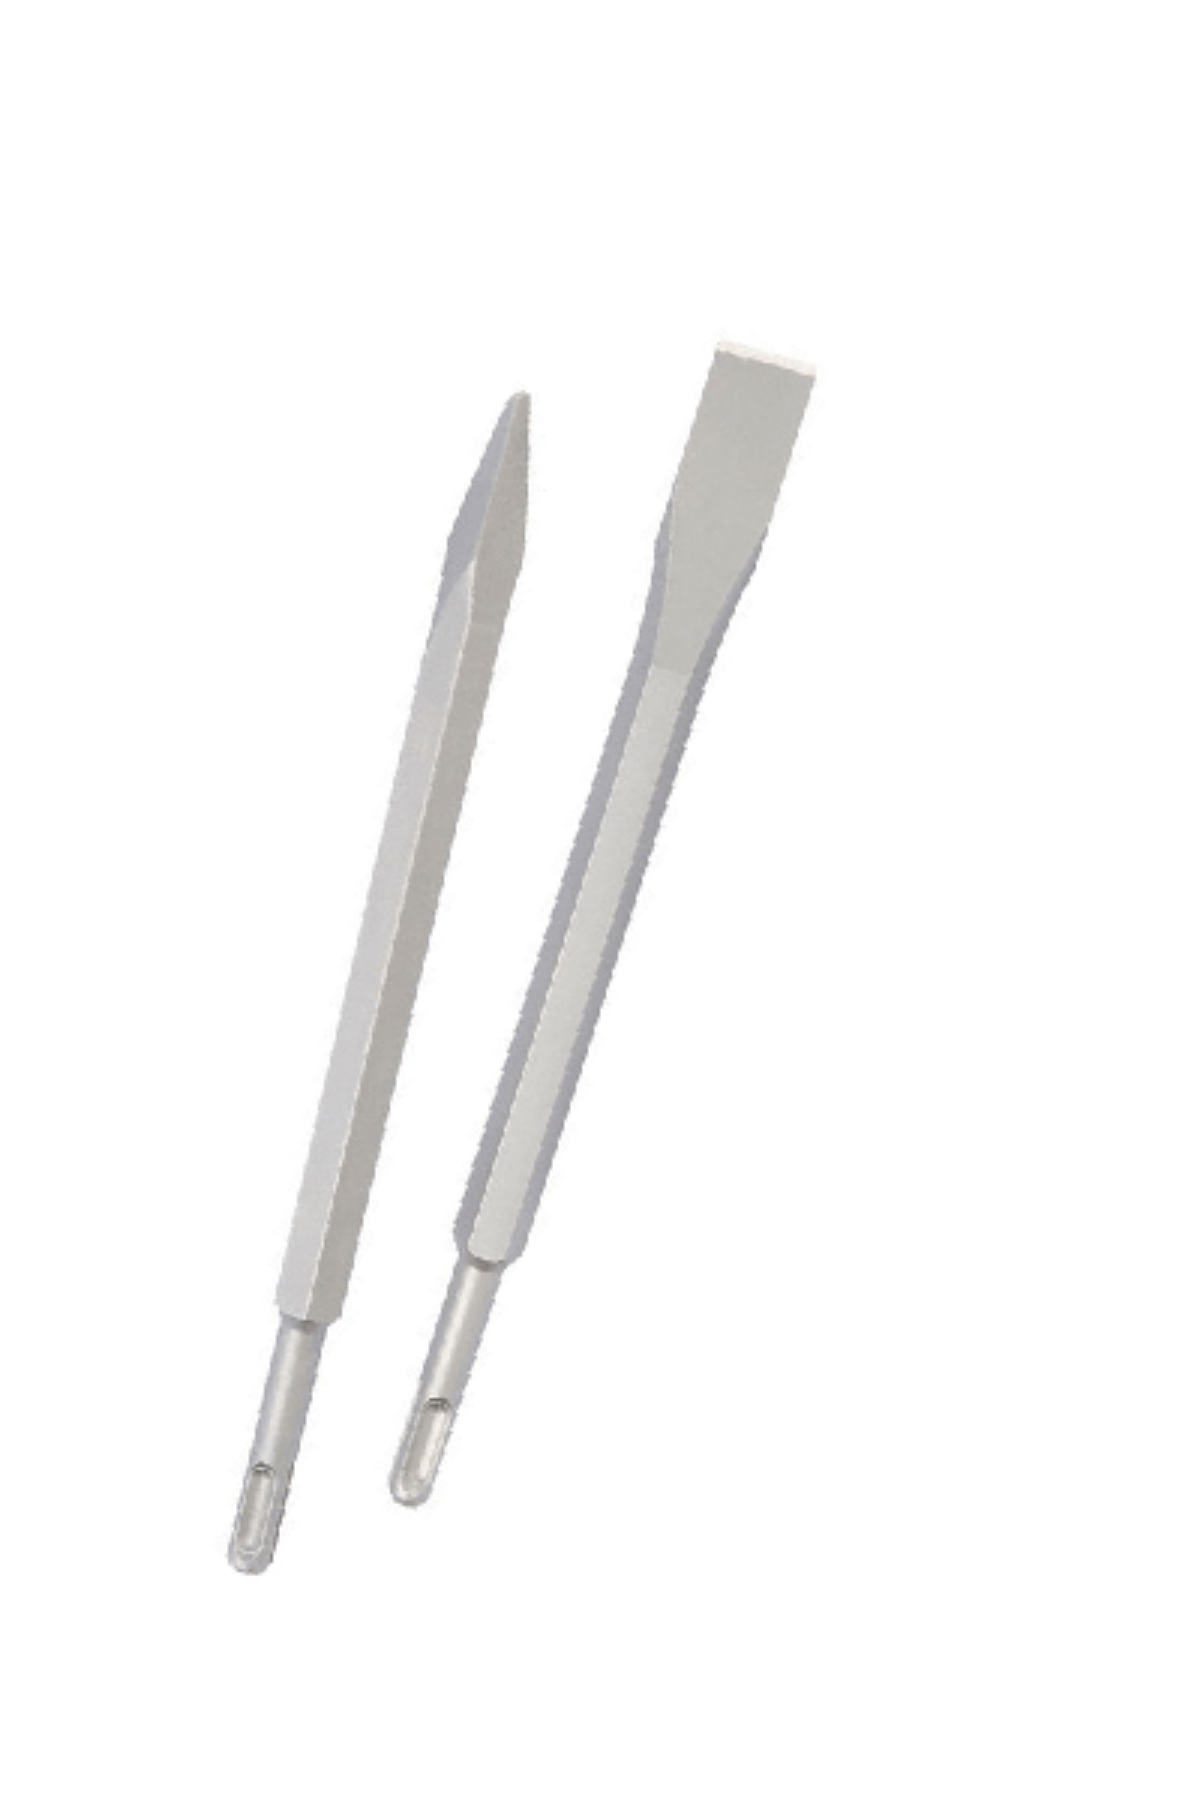 SDS Point Chisel For Stone And Concrete